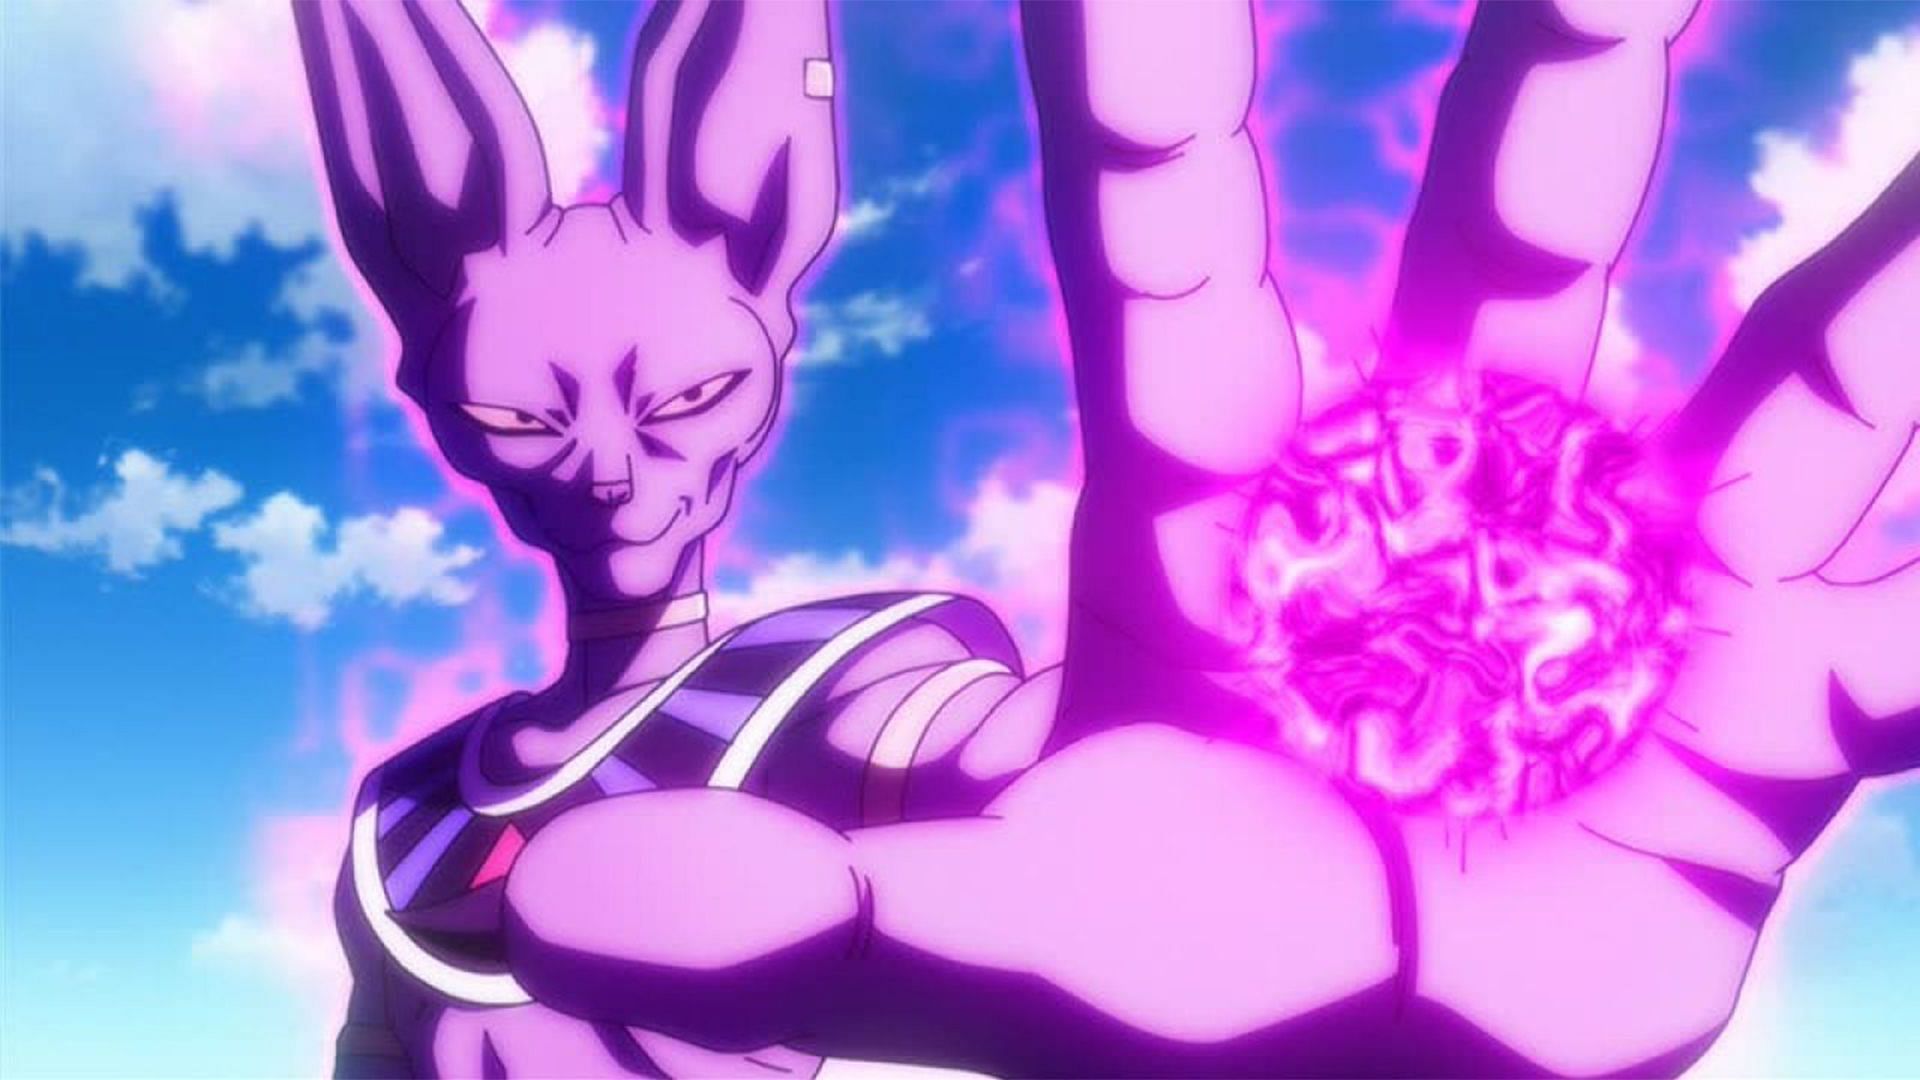 Dragon Ball Theory: Does Beerus Have a Secret History with the Saiyans?